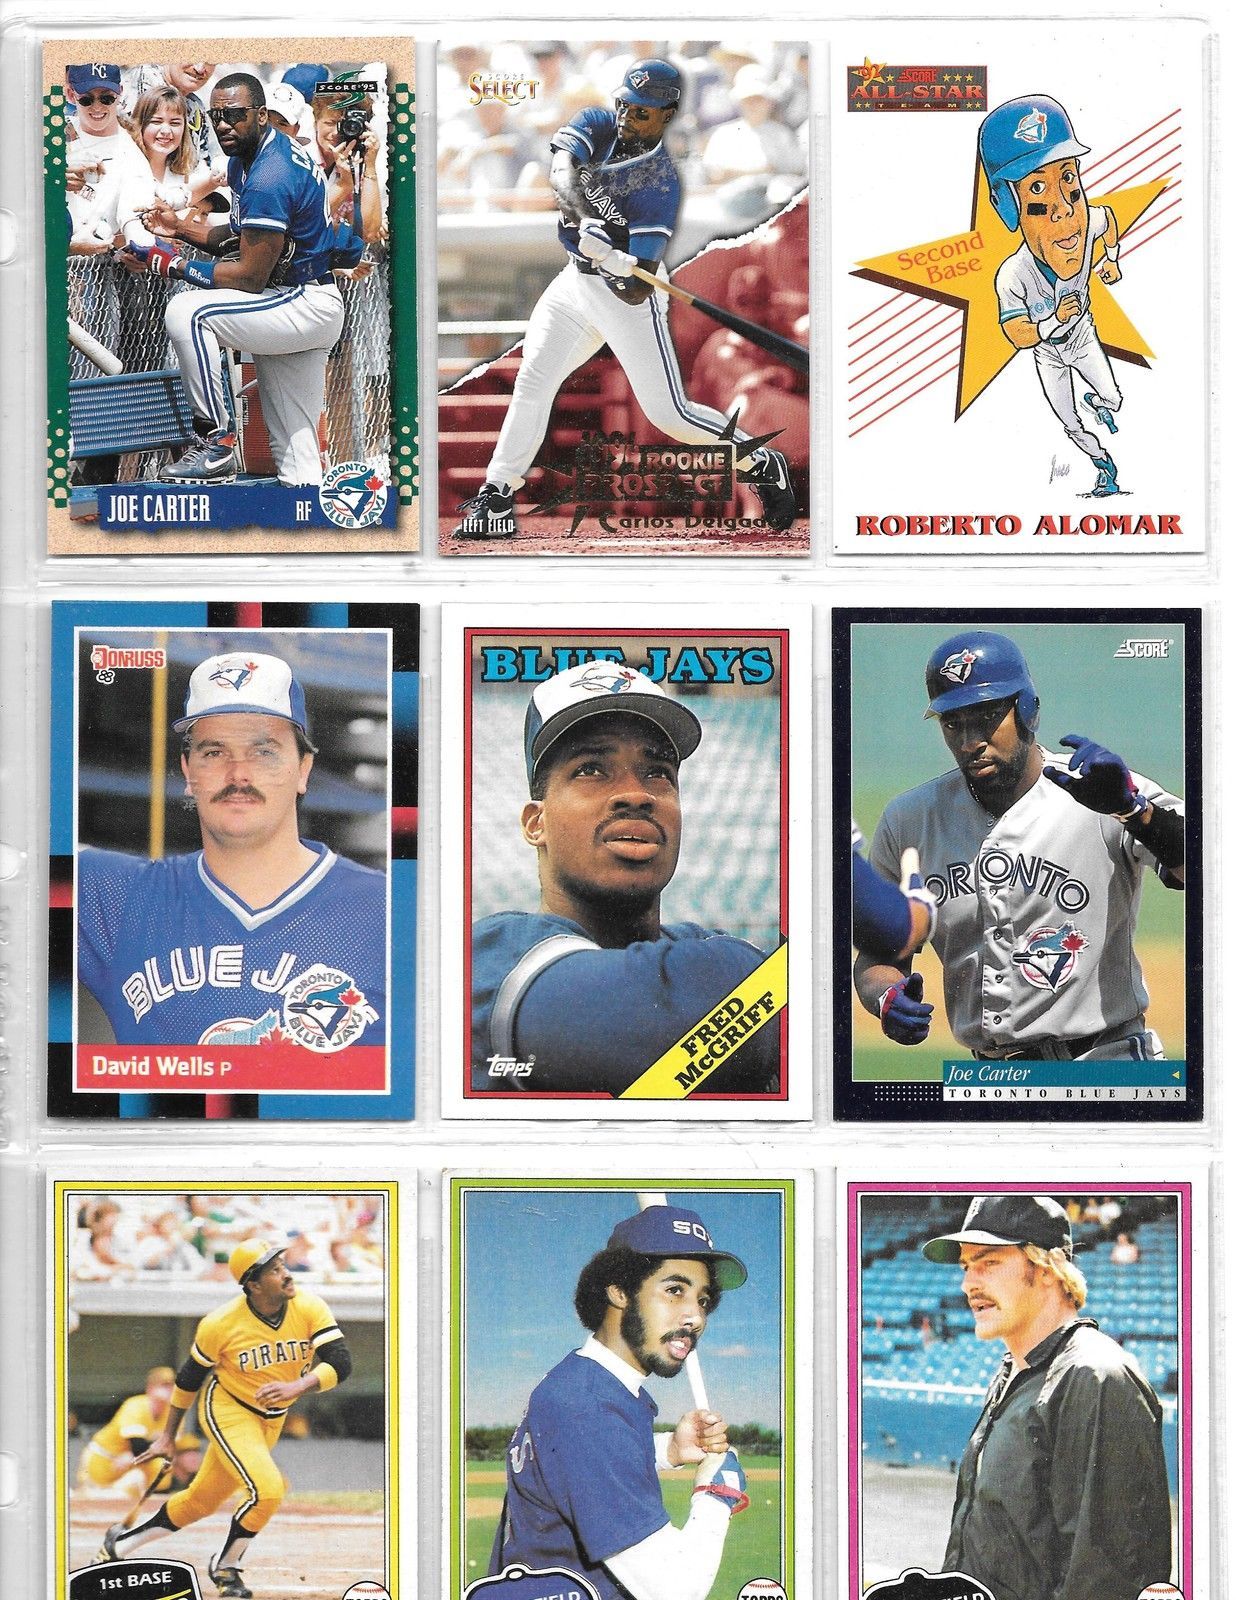 LOT OF 600  BASEBALL CARDS WITH KIRK GIBSON ROOKIE & HAROLD BAINES ROOKIE - $9.90